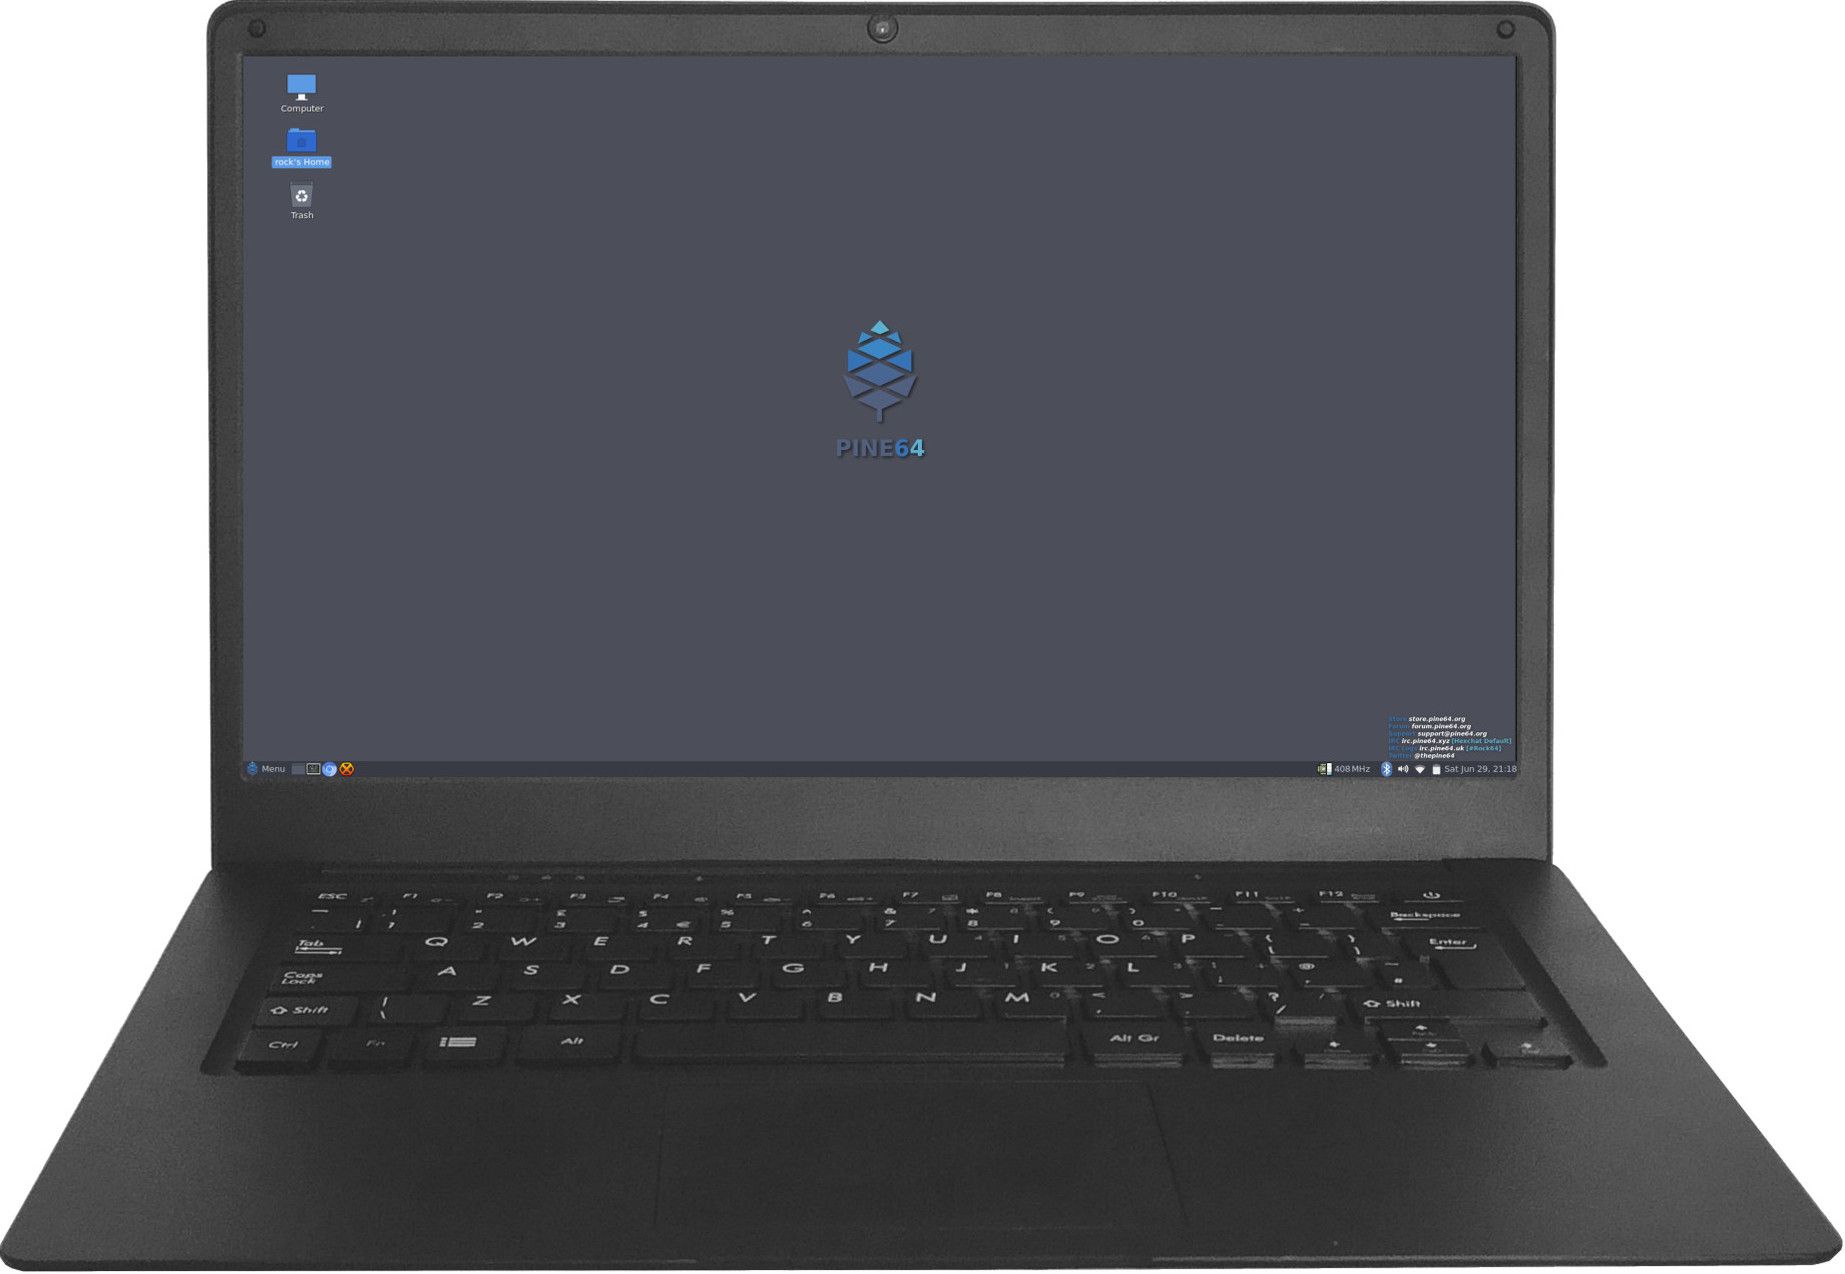 Tinkering with Manjaro and NetBSD on the Pinebook Pro: a crumbs-in-the-forest tutorial & review